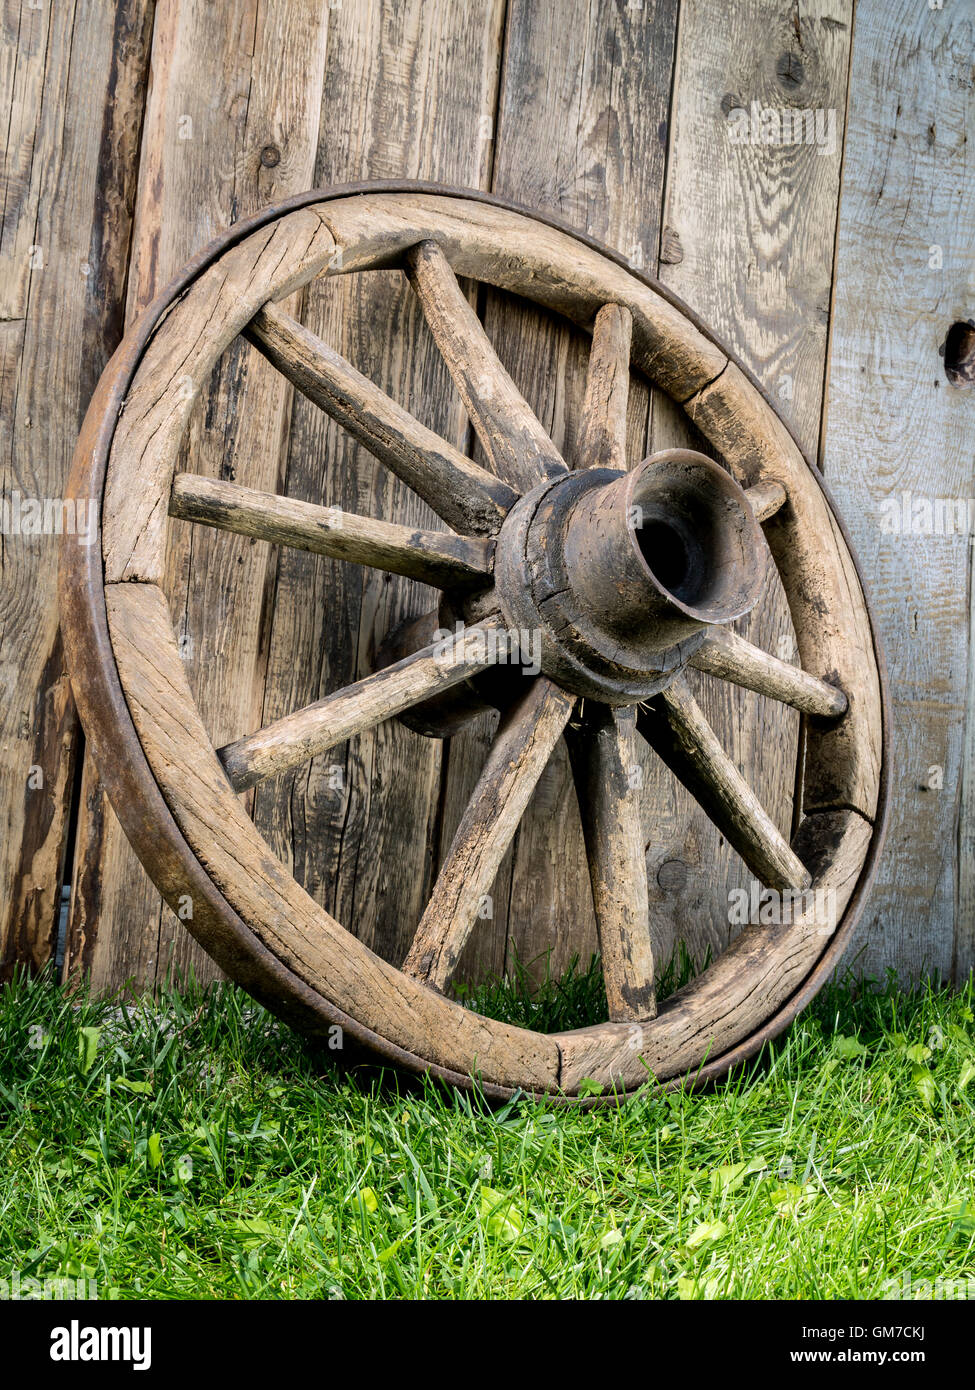 Old wooden wagon wheel resting against rustic wooden fence Stock Photo